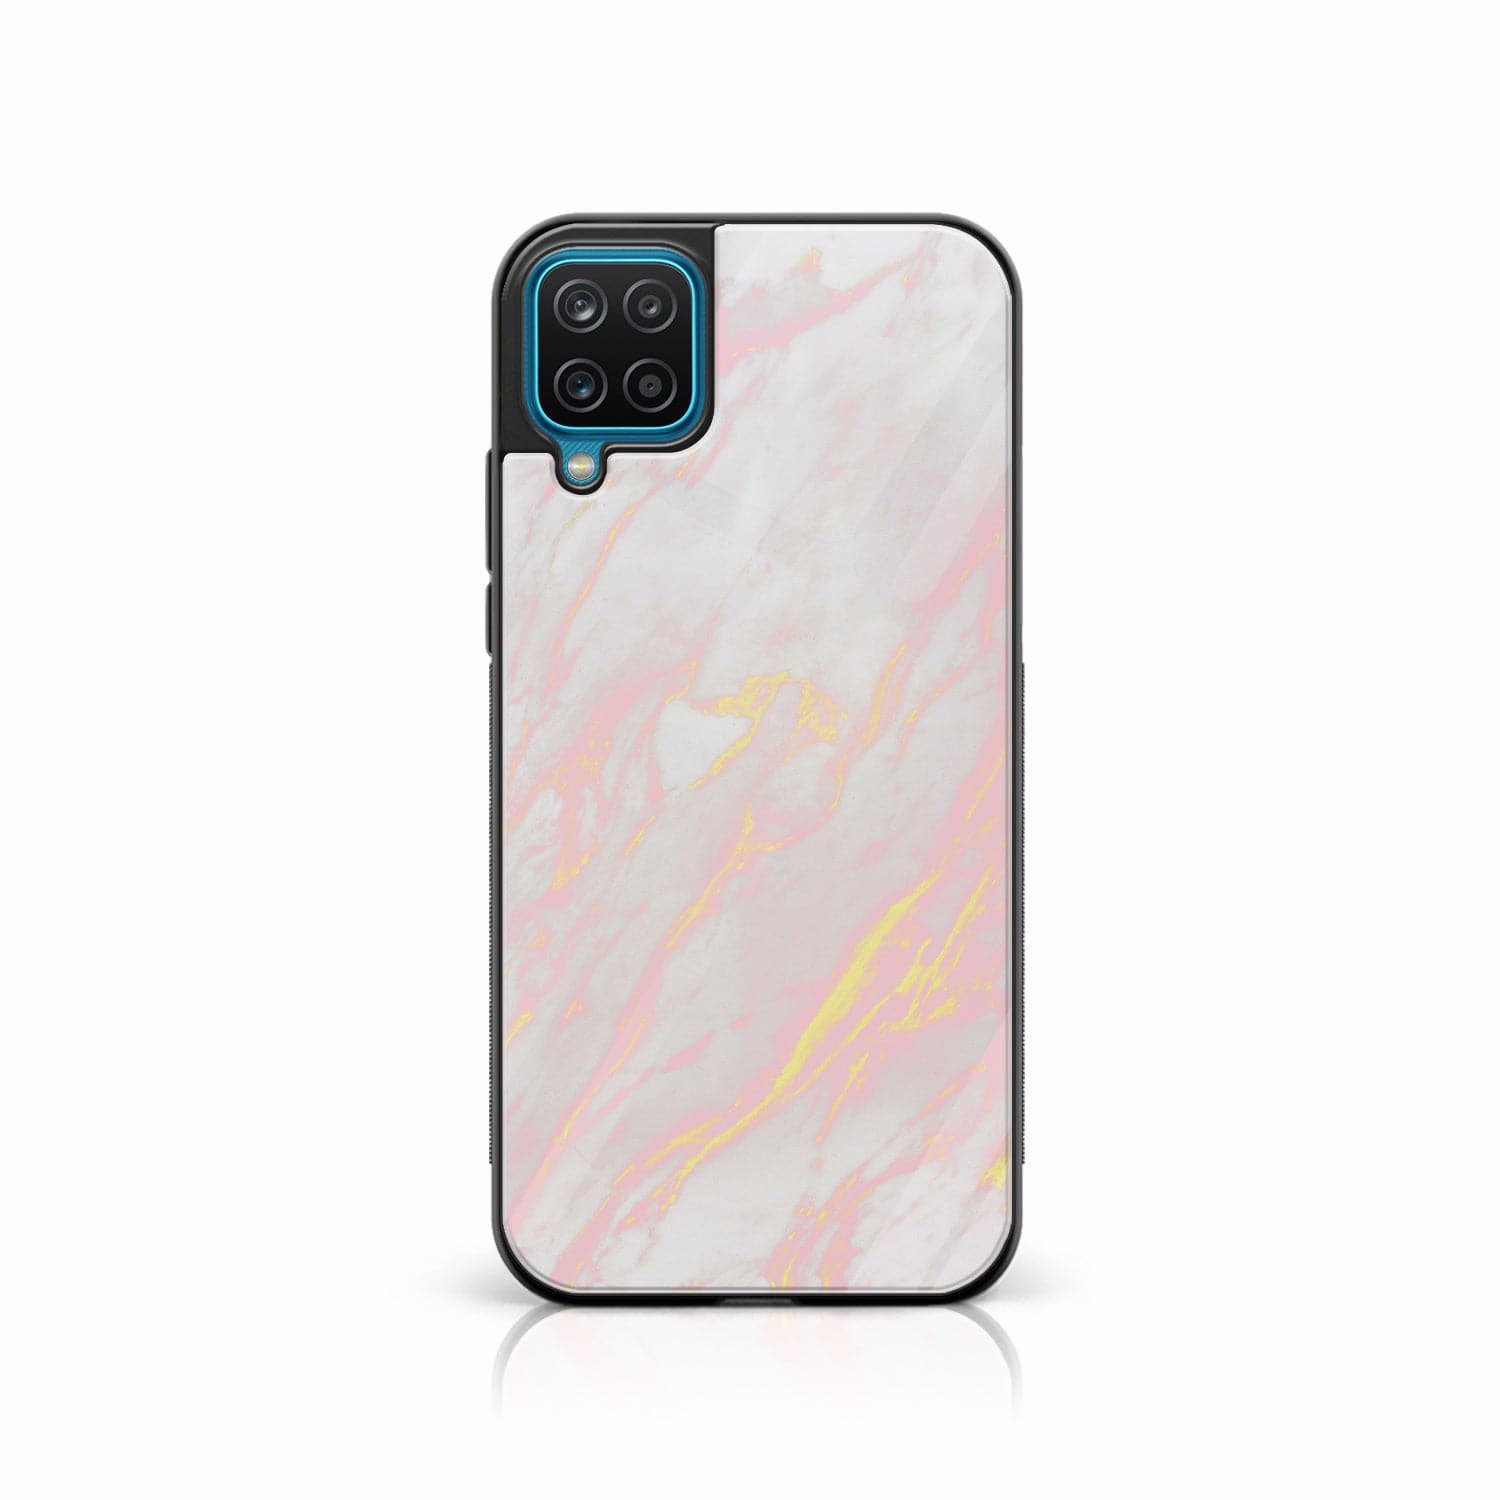 Samsung Galaxy A42 5G - Pink Marble Series - Premium Printed Glass soft Bumper shock Proof Case